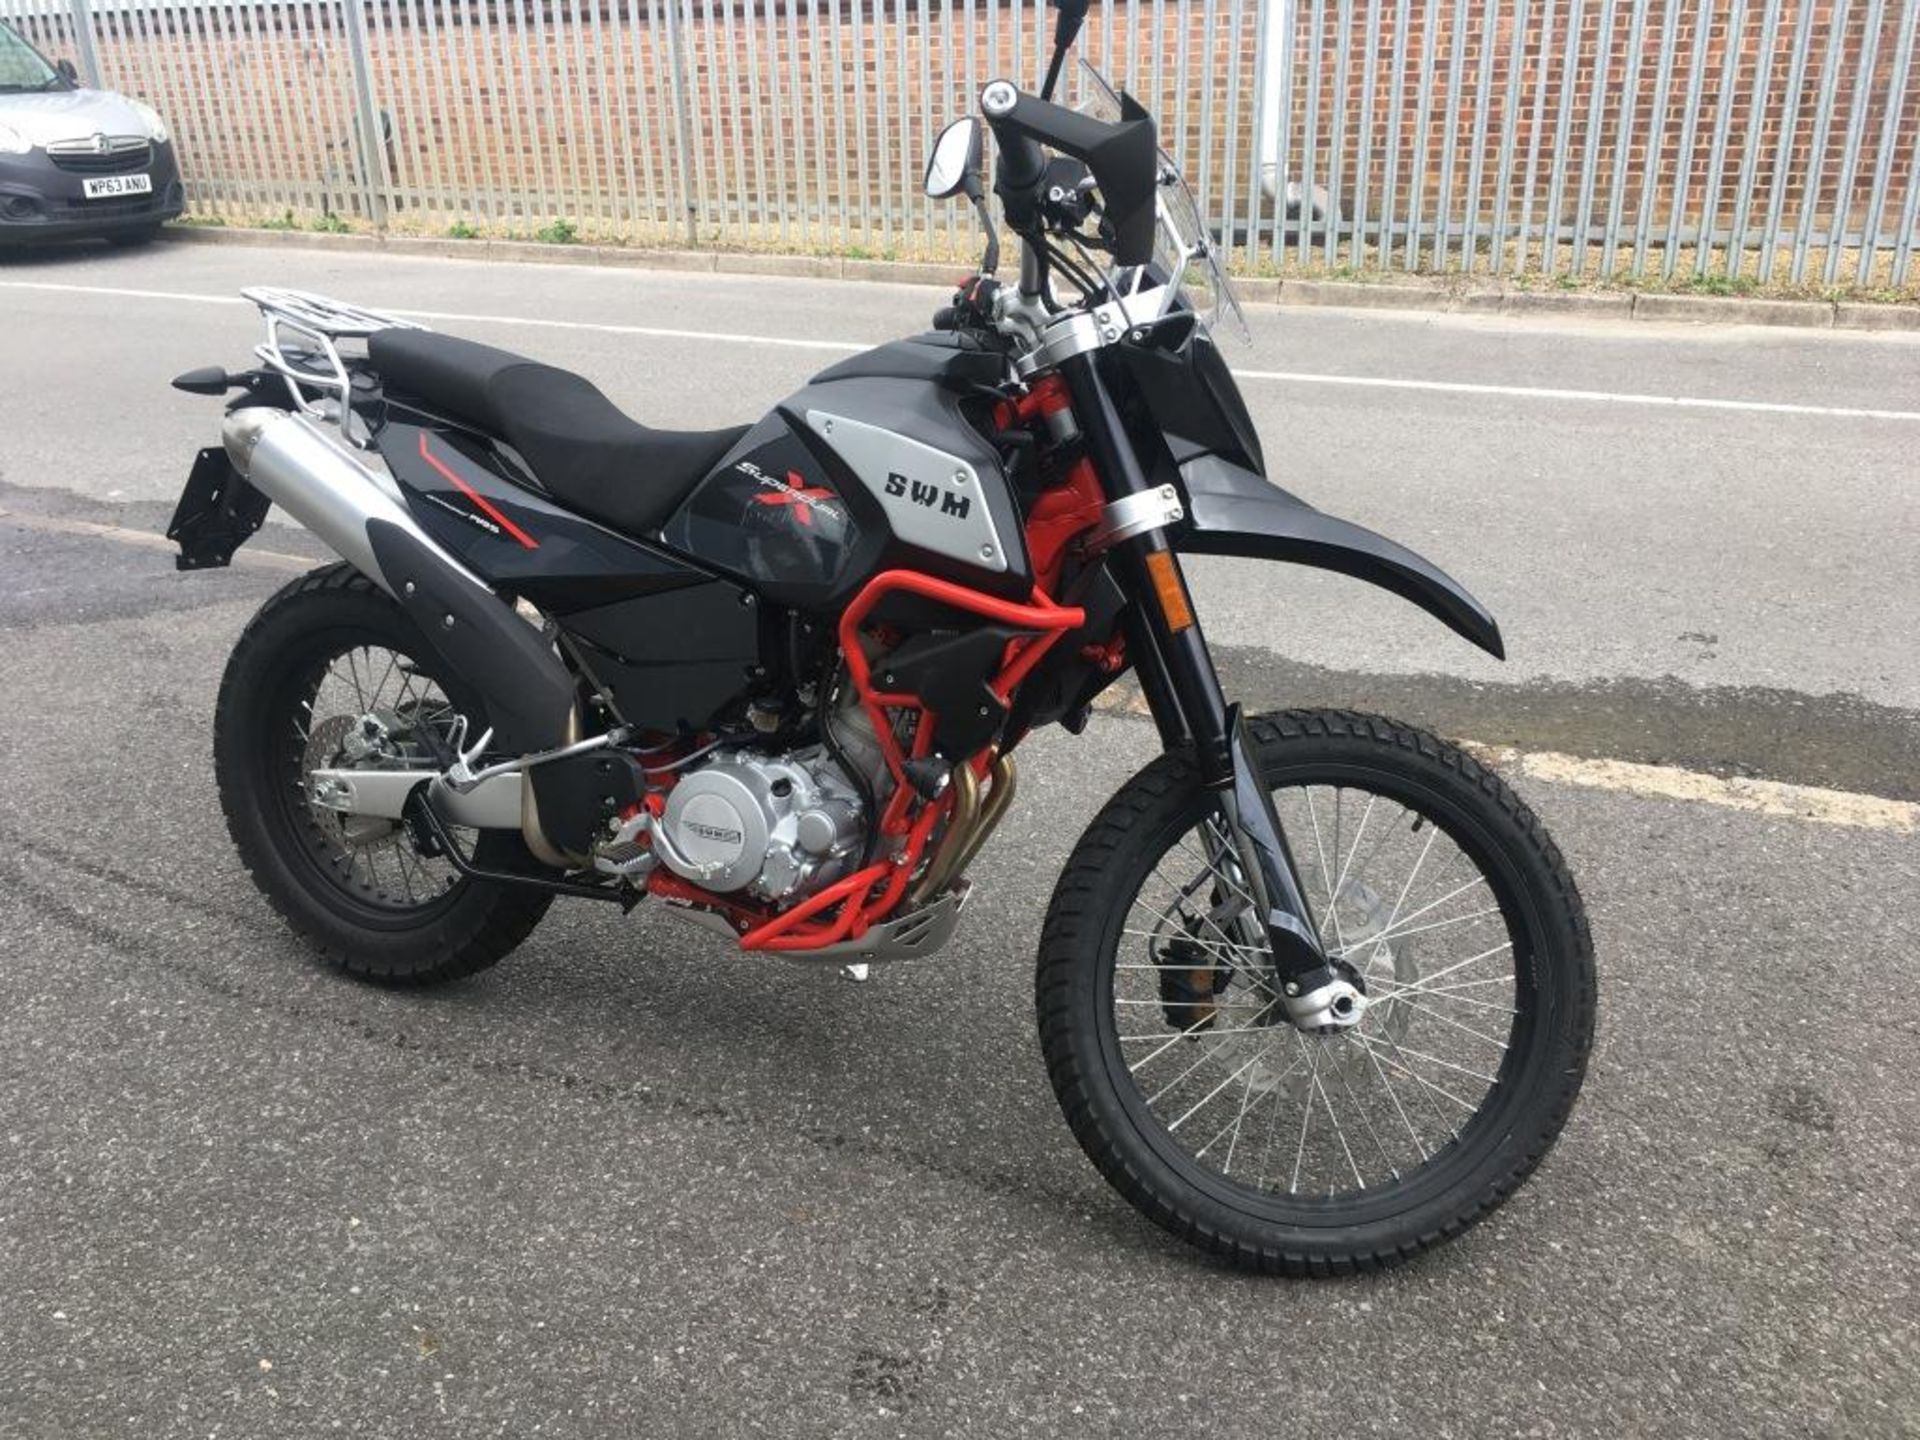 SWM SuperDual 600x motorcycle, Unregistered and no certificate of conformity held, VIN: - Image 2 of 11